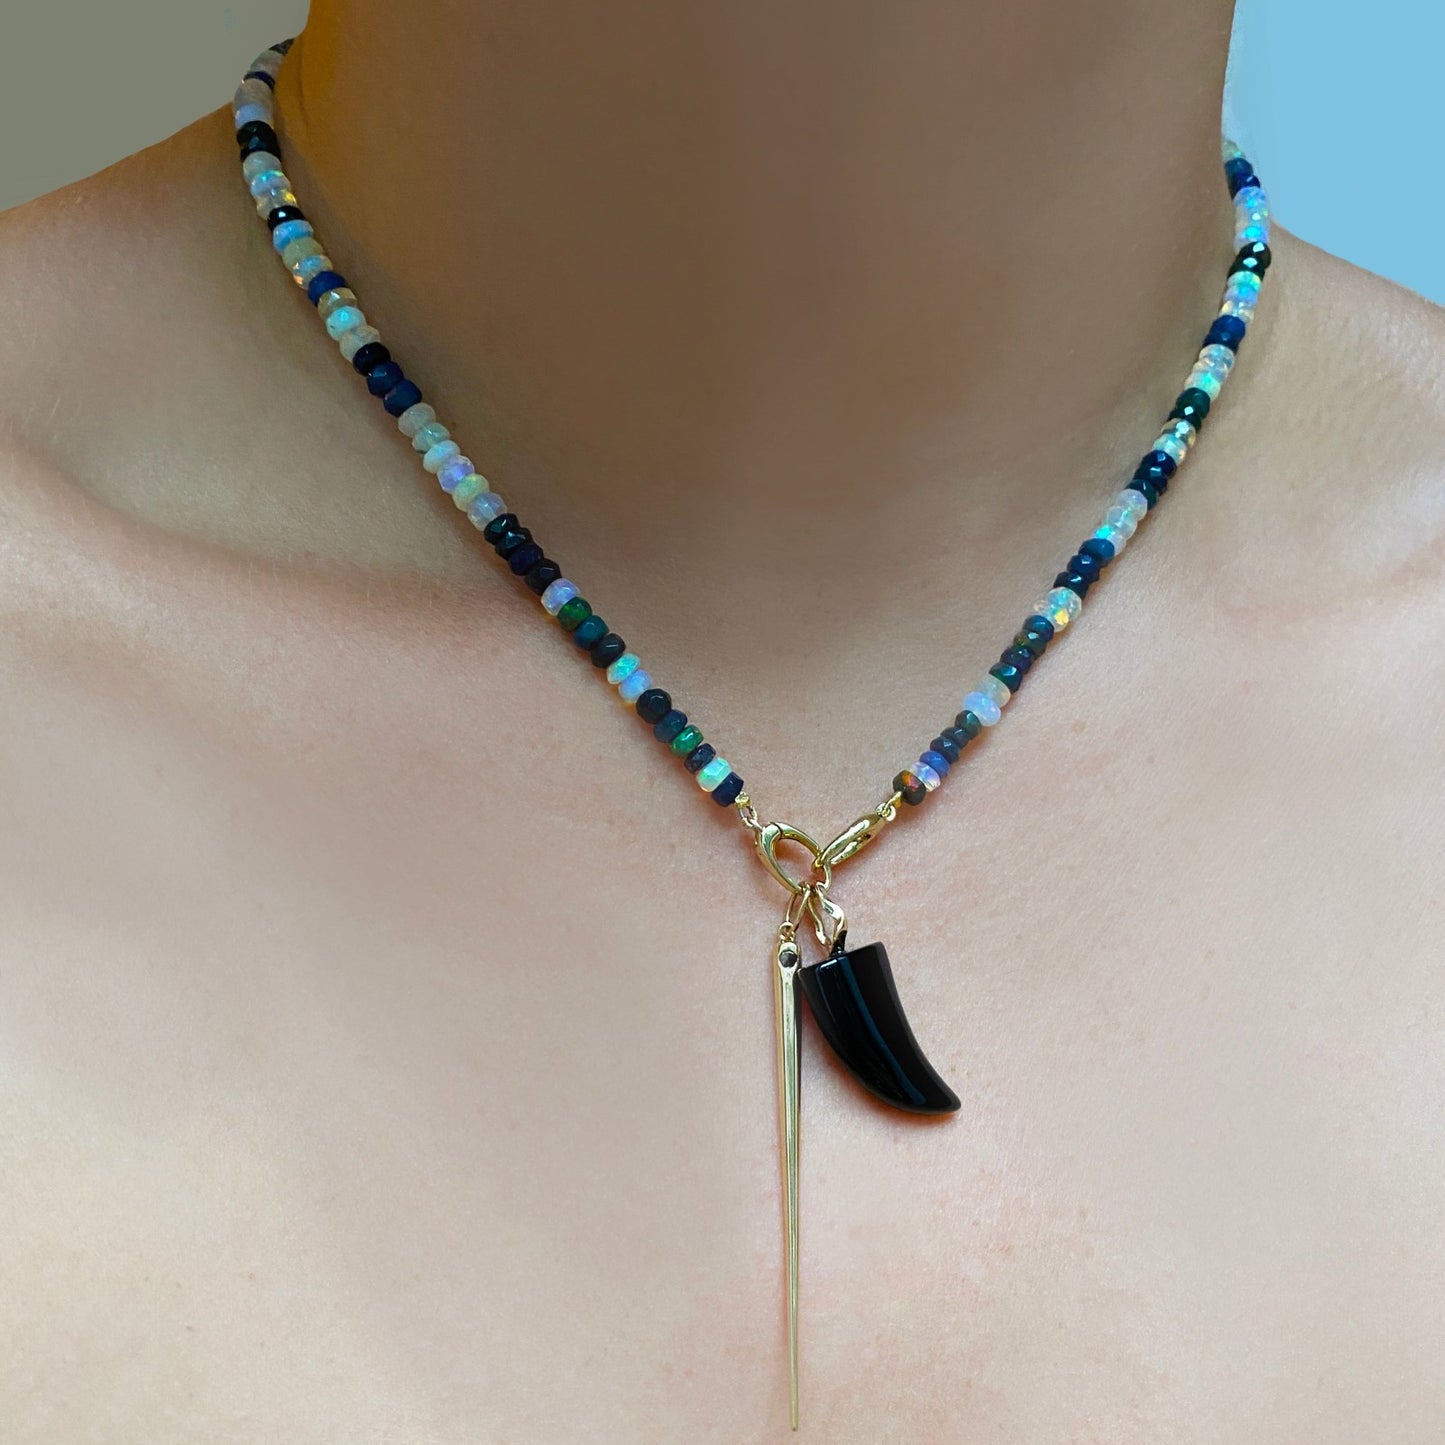 Black agate horn charm. Styled on a neck with a quill spike charm hanging from oval clasps of a beaded necklace.